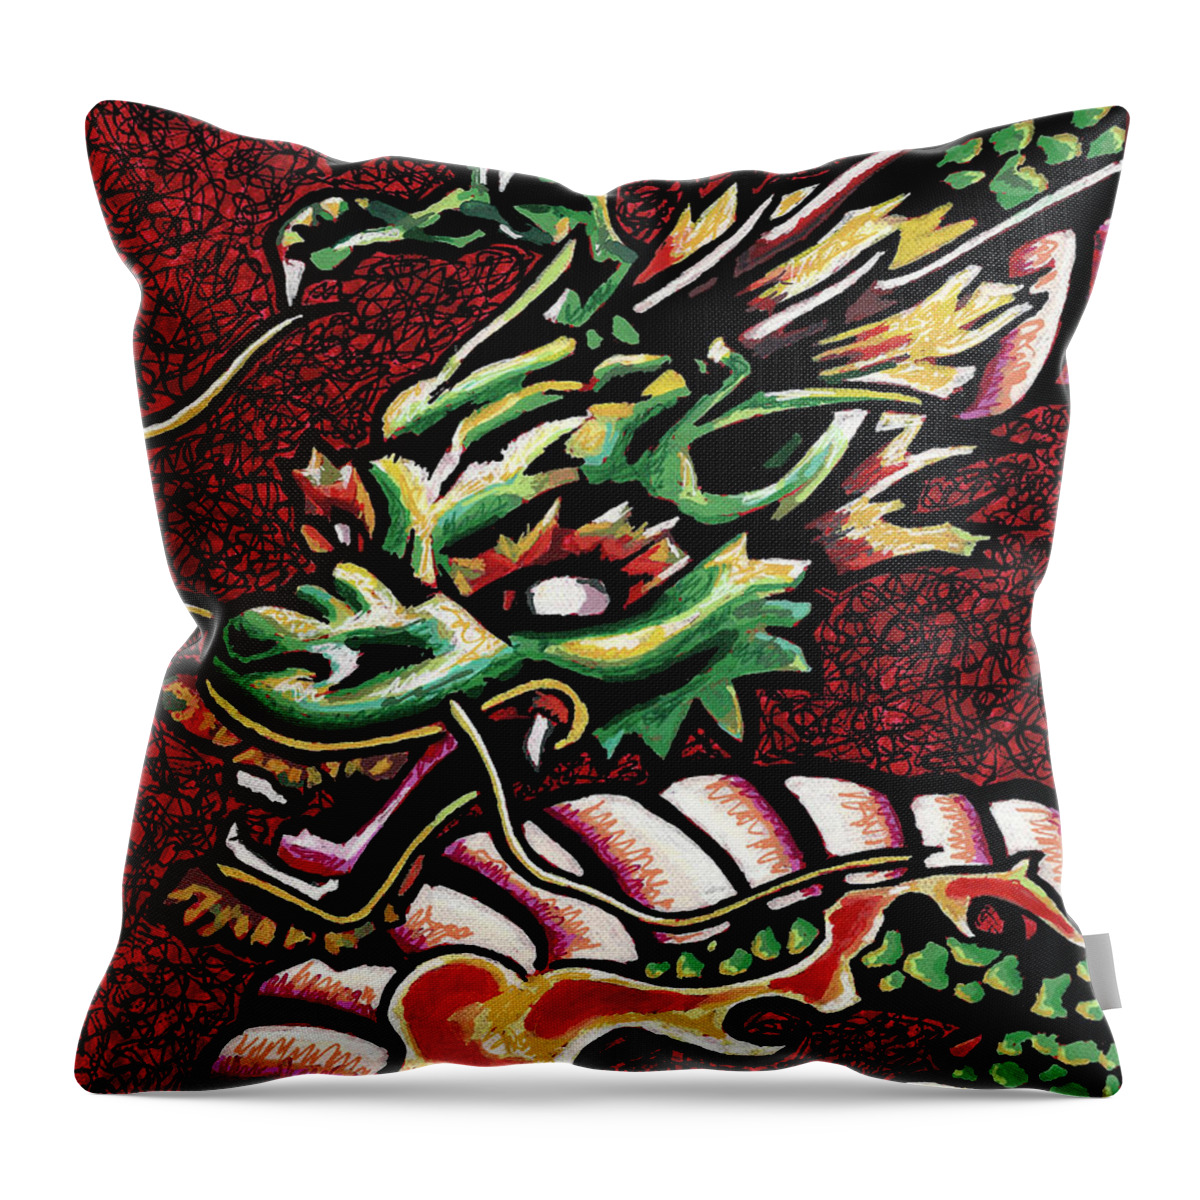 Creature Throw Pillow featuring the painting Dragon by Maria Arango